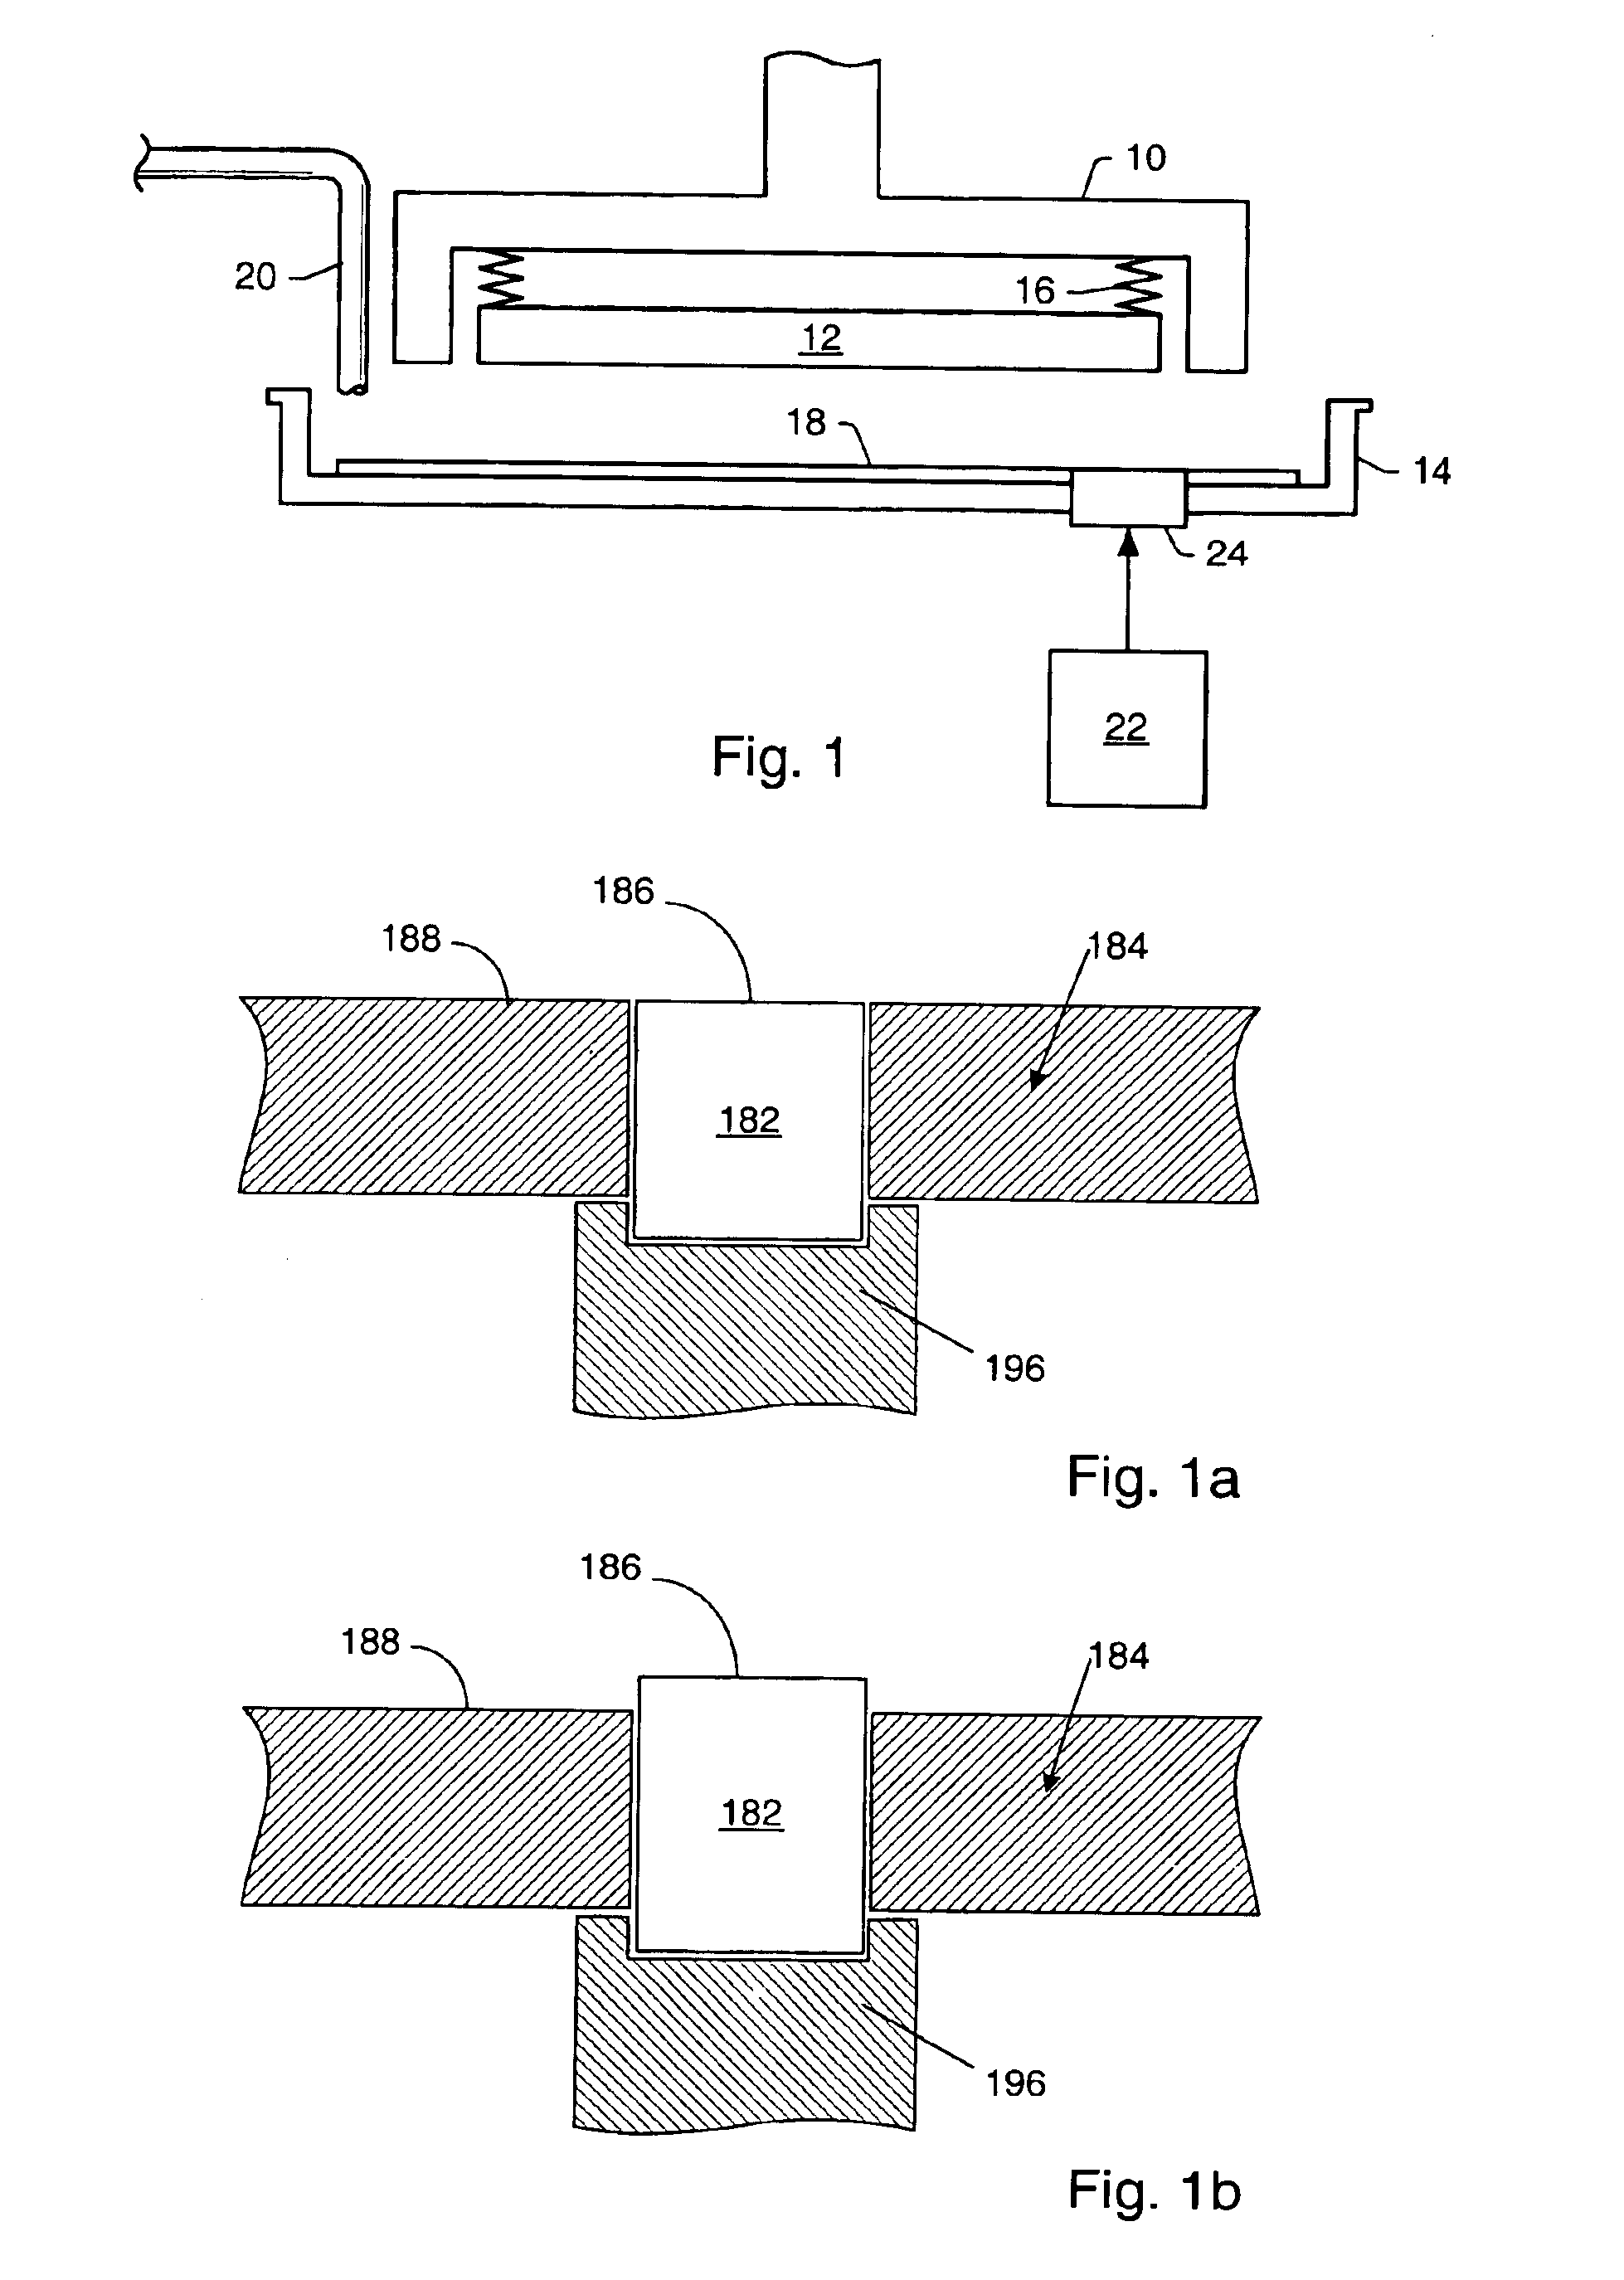 Systems and methods for characterizing a polishing process